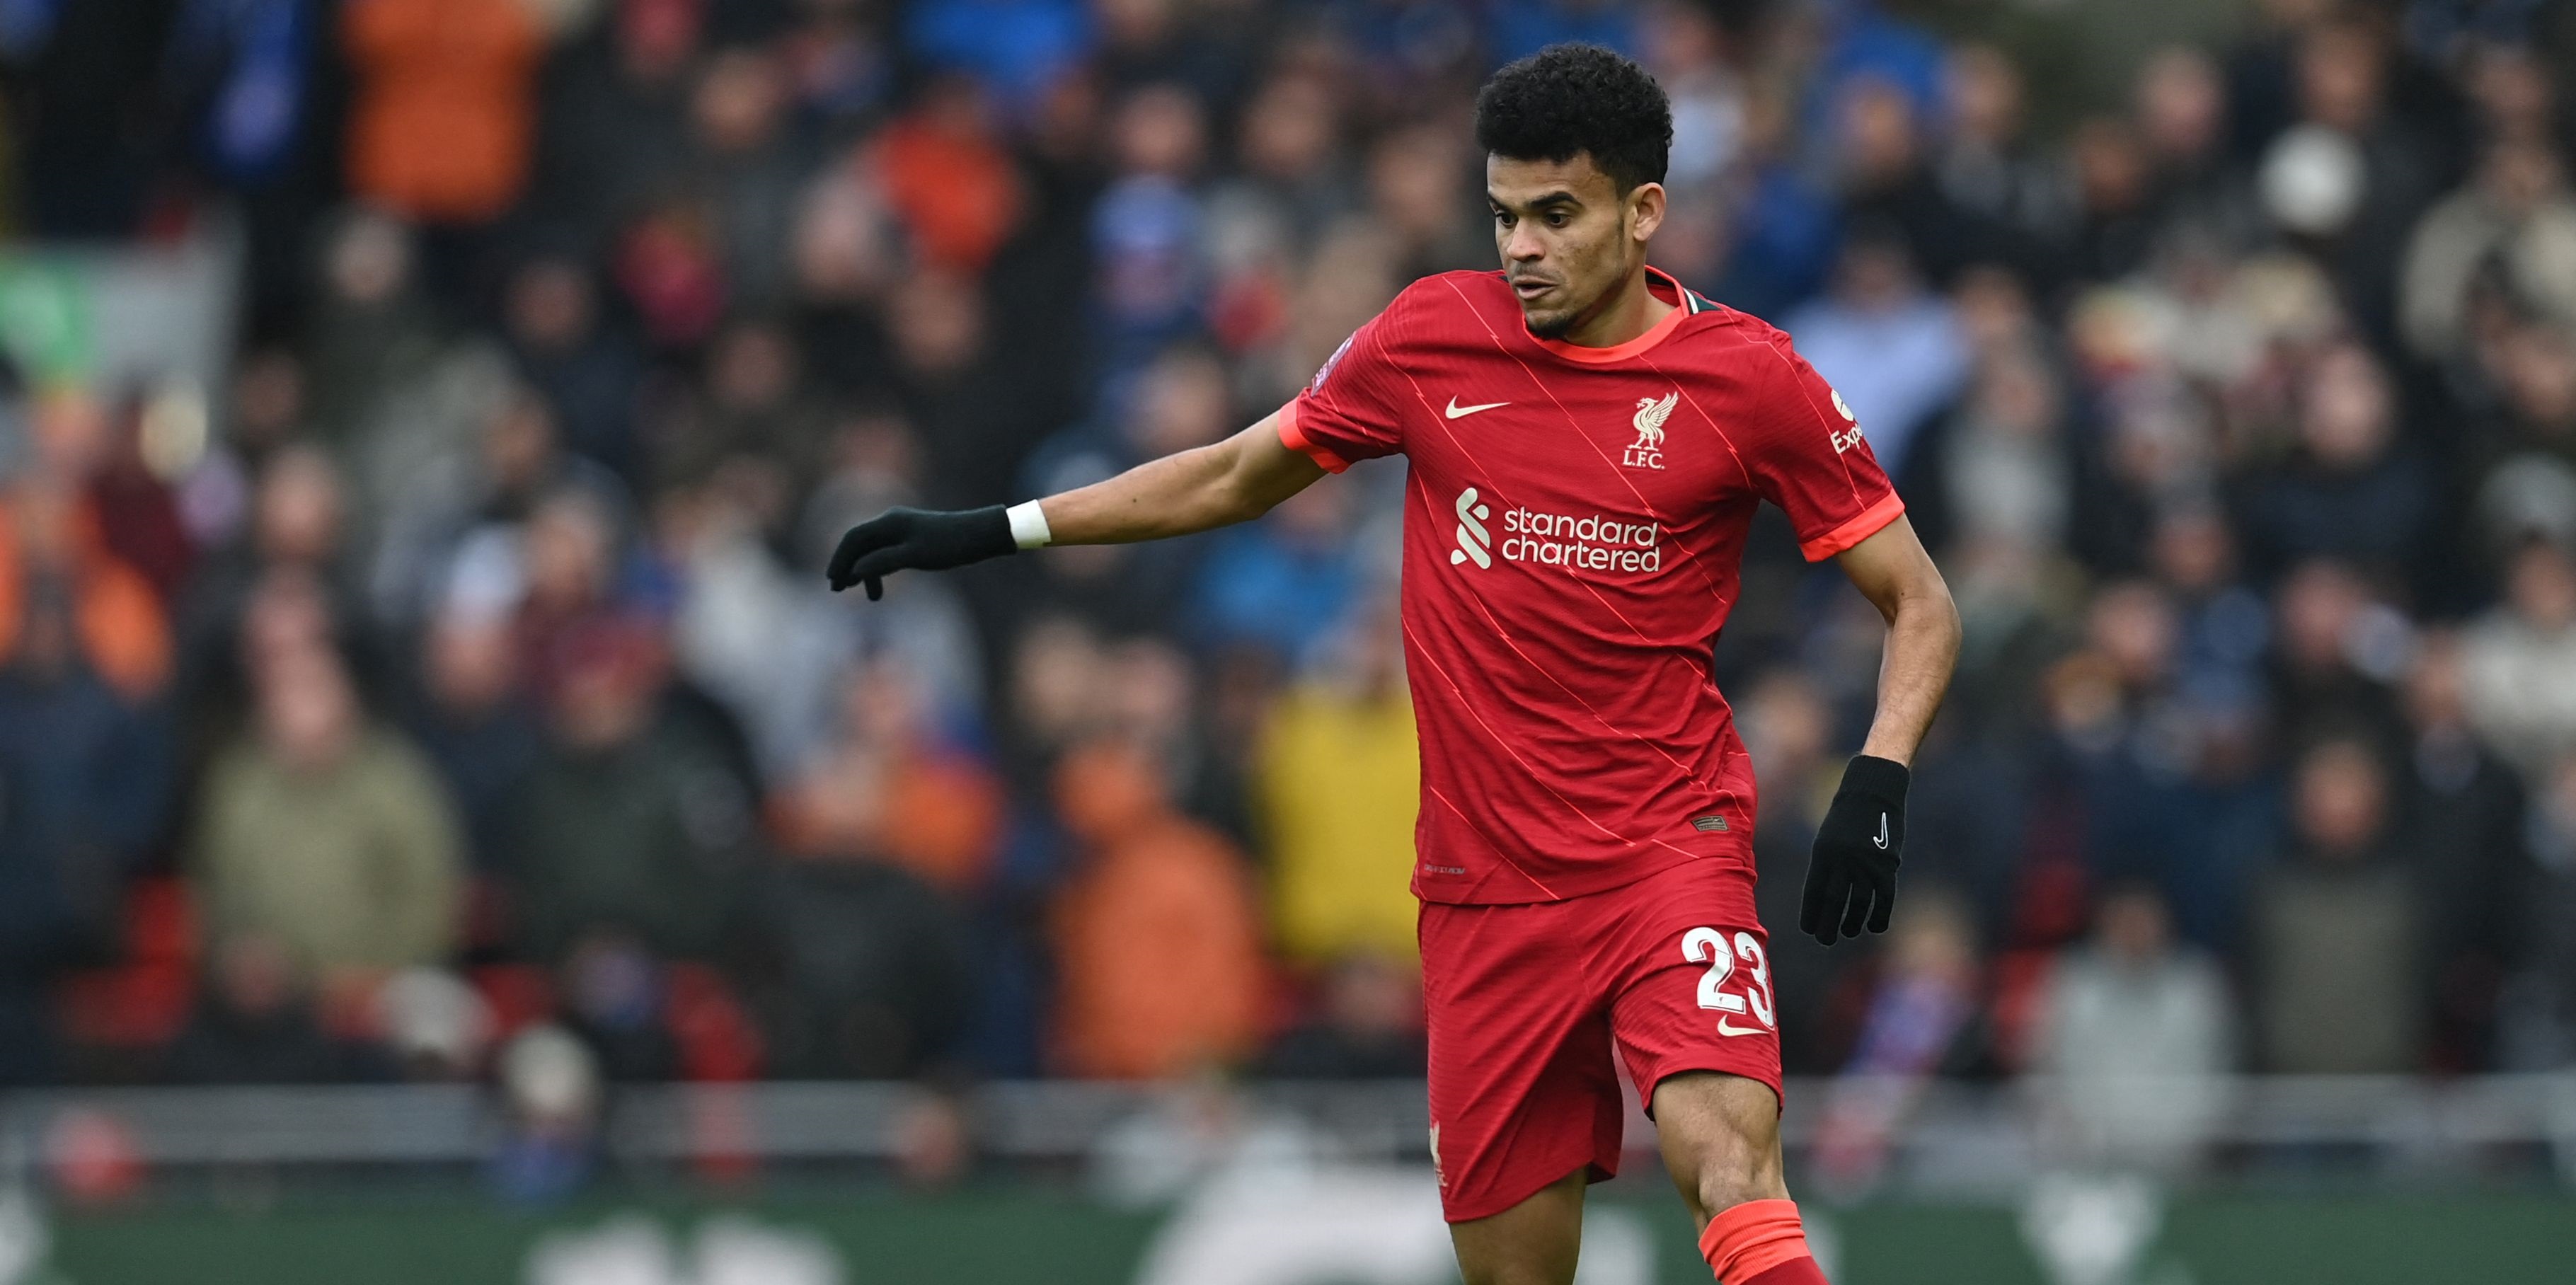 Journalist suggests Liverpool’s Diaz signing is ‘bigger’ than Real Madrid’s £71m transfer in 2014